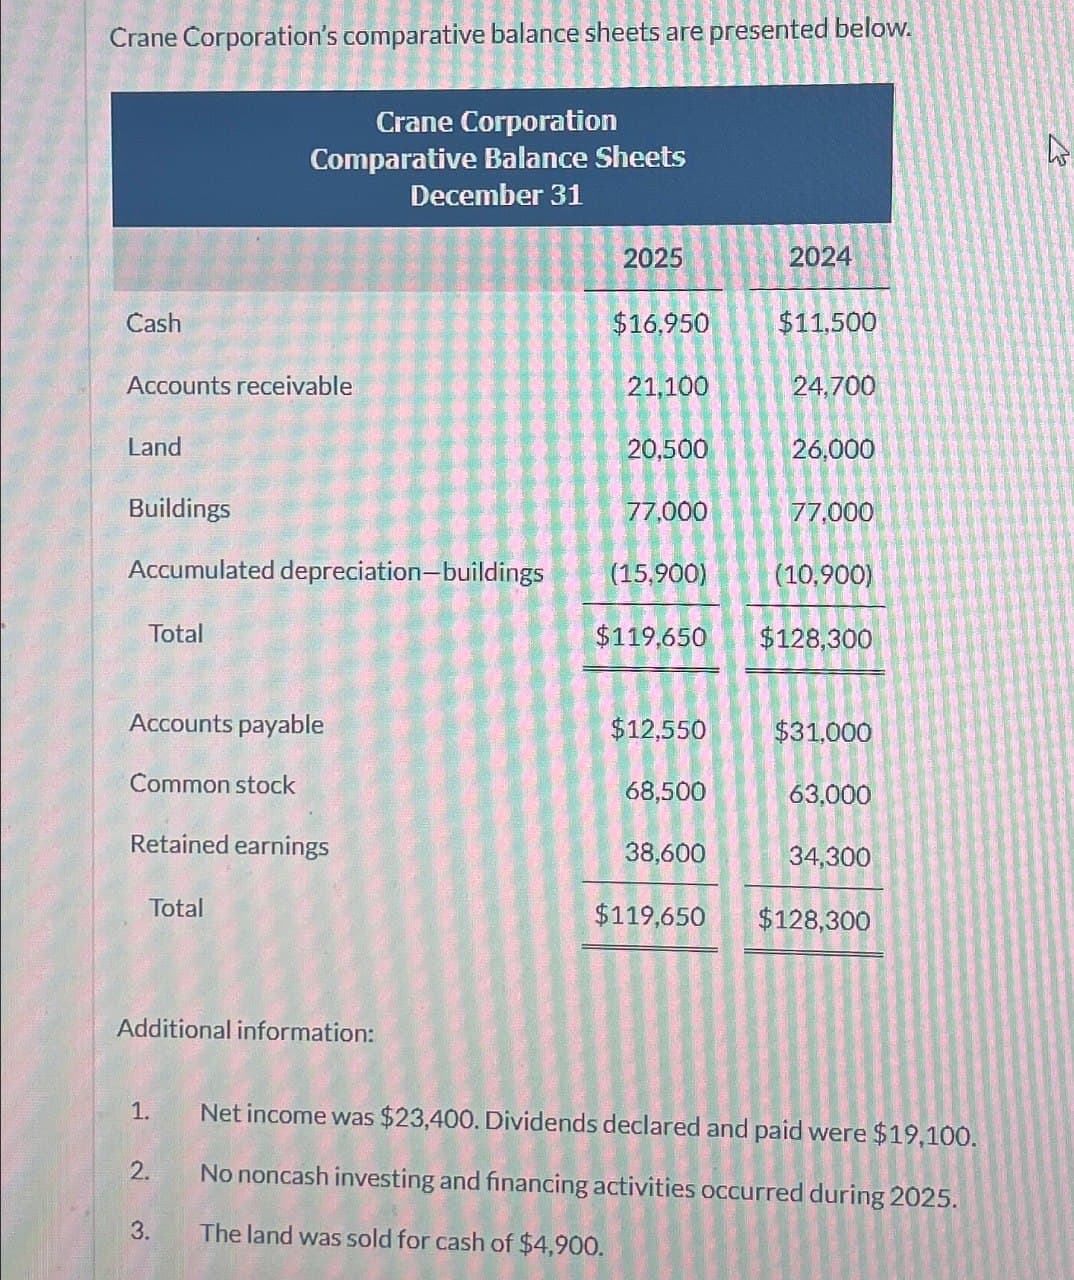 Crane Corporation's comparative balance sheets are presented below.
Crane Corporation
Comparative Balance Sheets
December 31
2025
2024
Cash
$16,950
$11,500
Accounts receivable
21,100
24,700
Land
20,500
26,000
Buildings
77,000
77,000
Accumulated depreciation-buildings
(15,900)
(10,900)
Total
$119,650 $128,300
Accounts payable
$12,550
$31,000
Common stock
68,500
63,000
Retained earnings
38,600
34,300
Total
$119,650
$128,300
Additional information:
1.
Net income was $23,400. Dividends declared and paid were $19,100.
2.
No noncash investing and financing activities occurred during 2025.
3.
The land was sold for cash of $4,900.